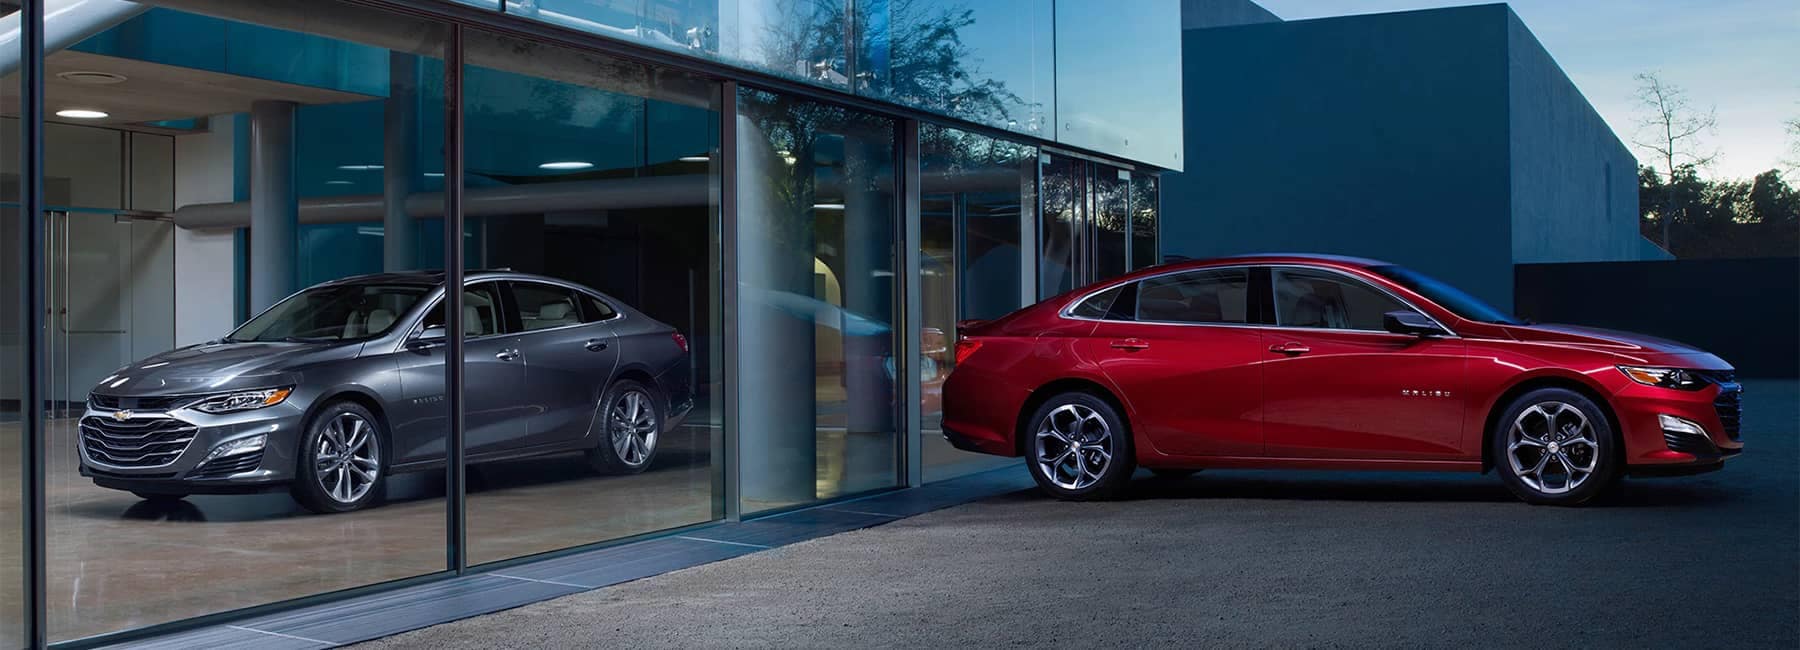 2019 Malibu Midsize Car Exterior Photo Side Profile and Front View